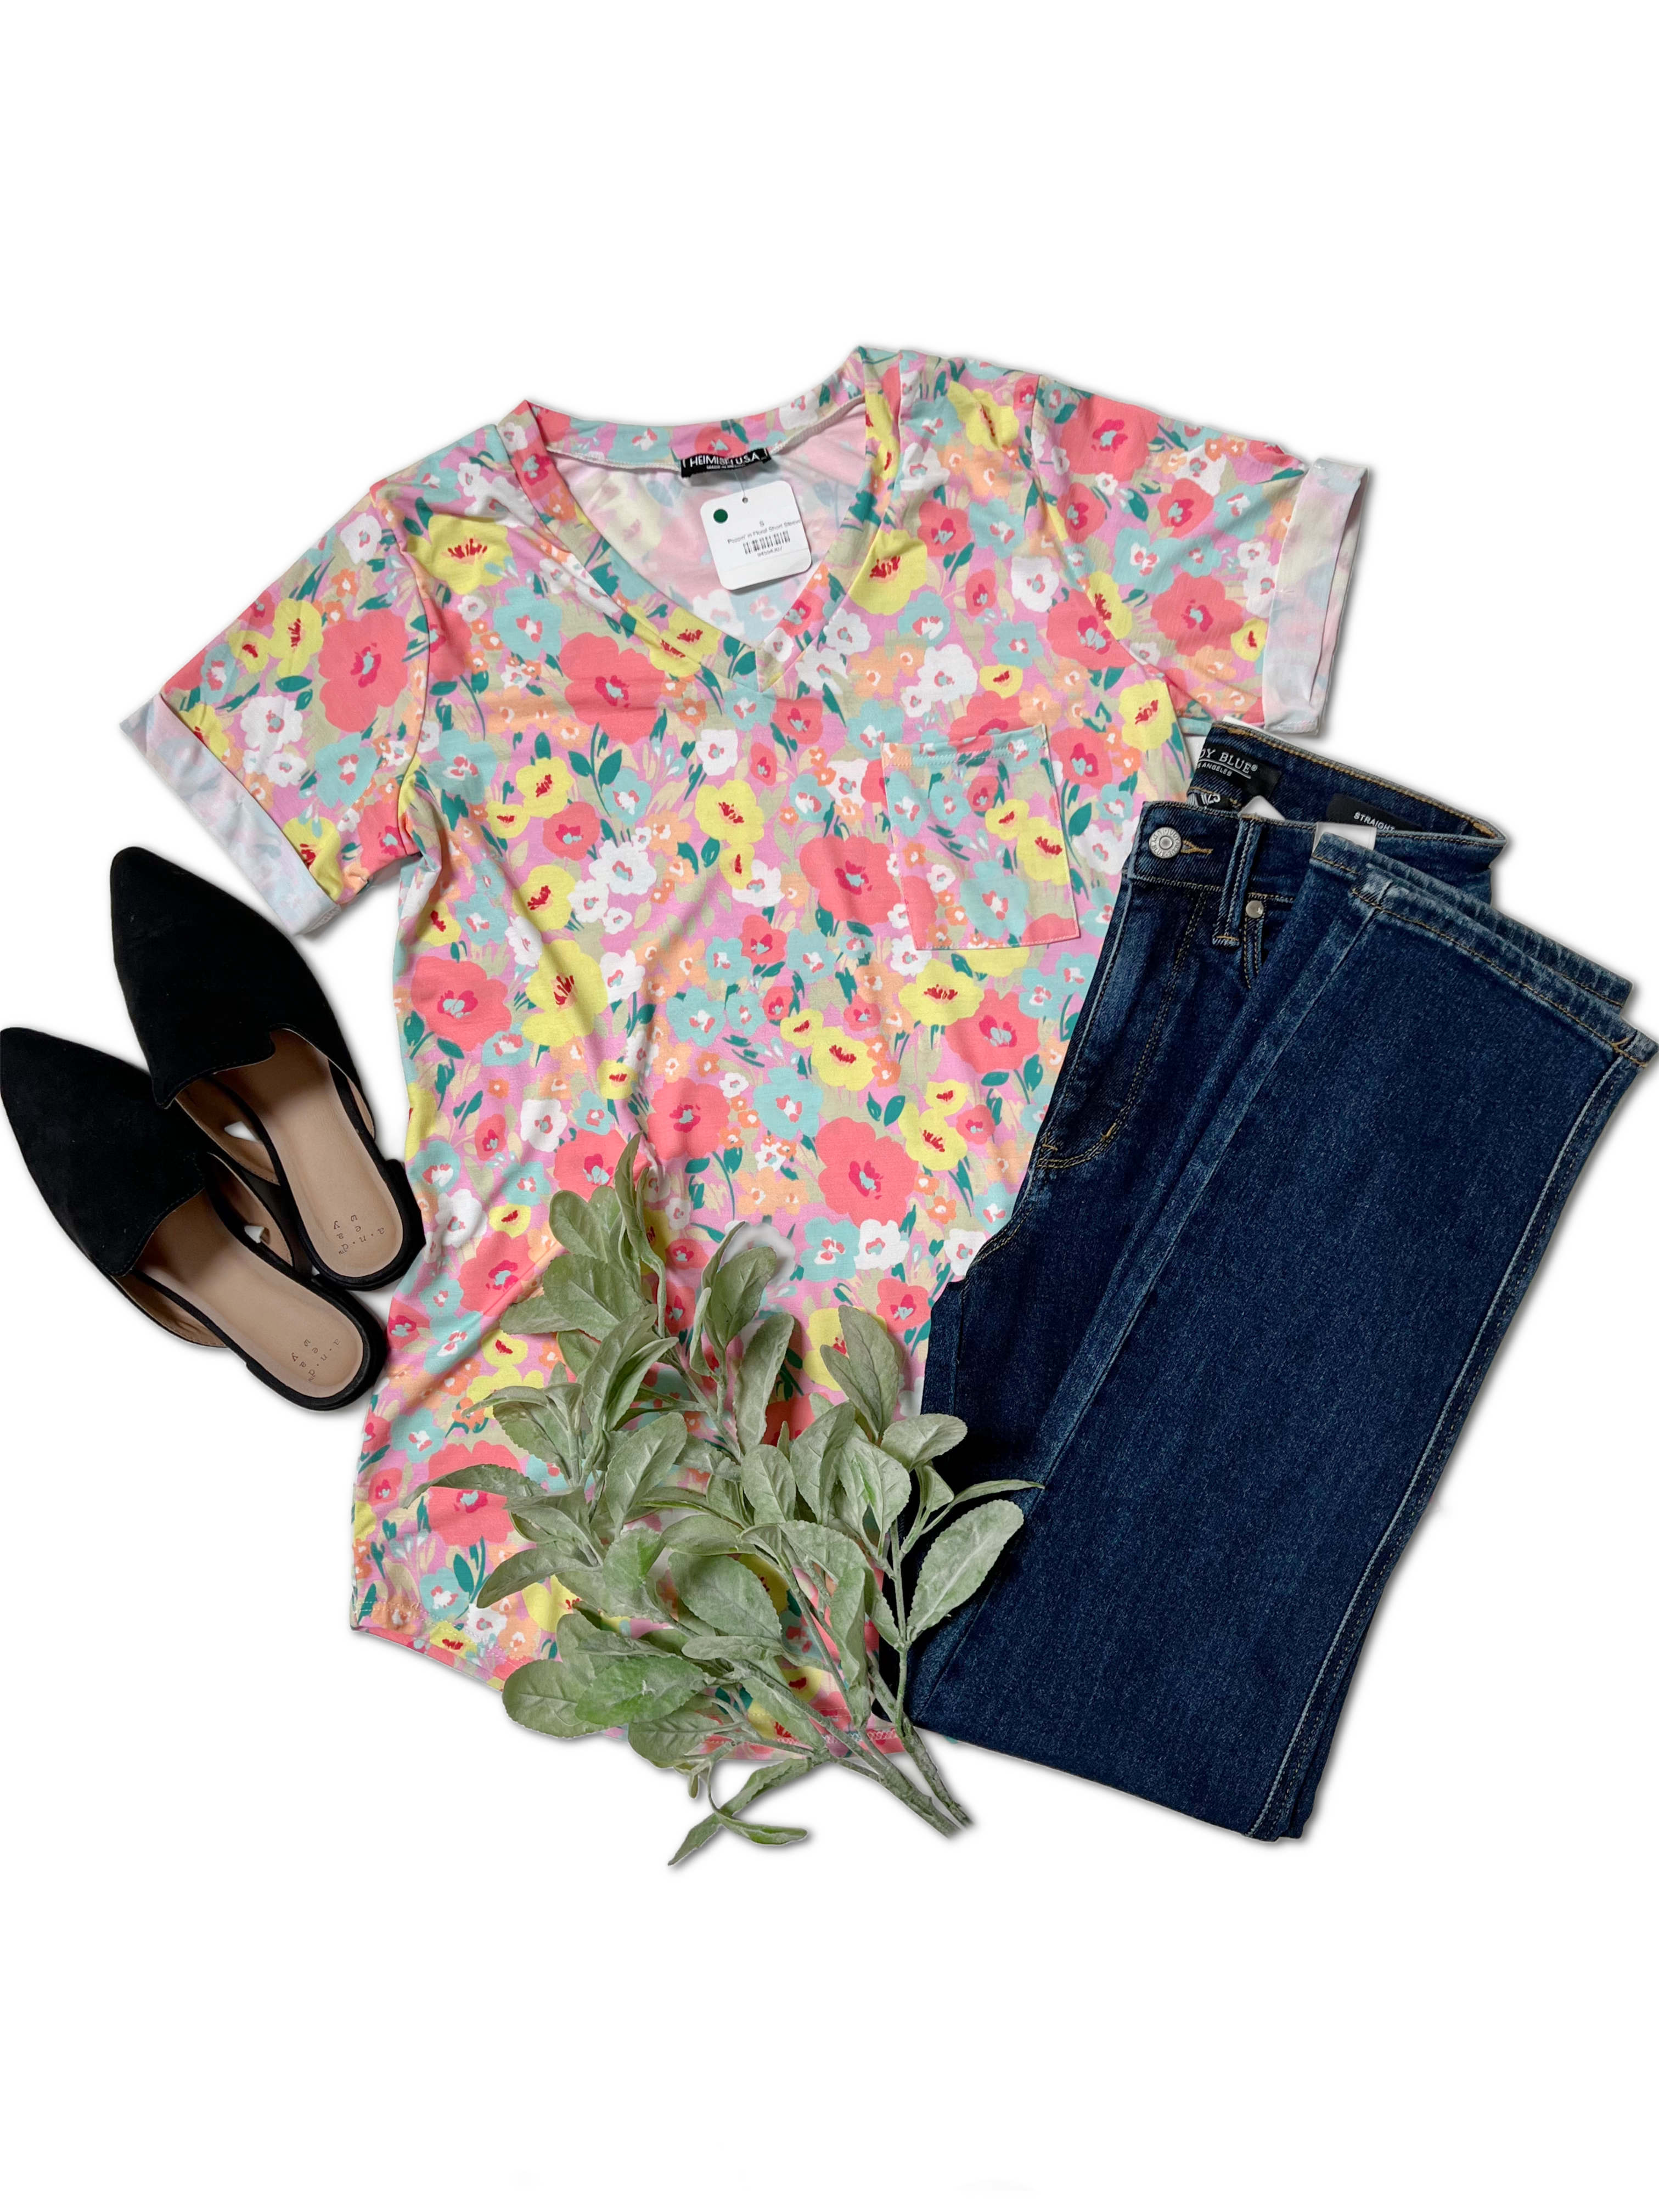 Poppin' in Floral Short Sleeve  Boutique Simplified   